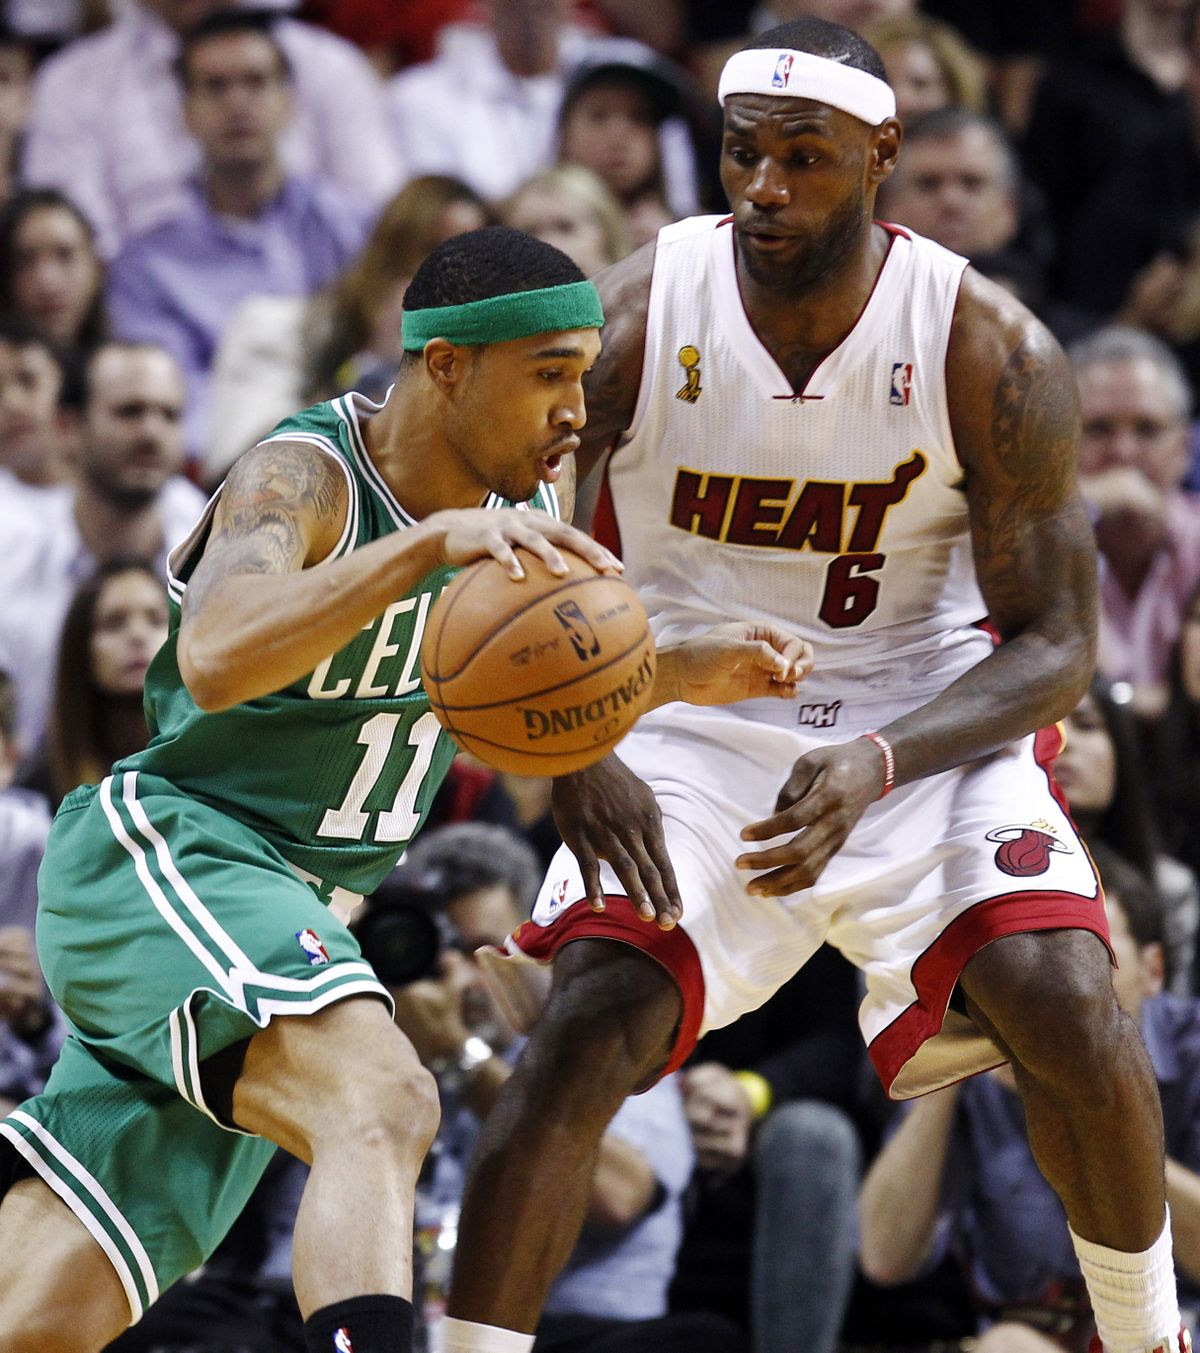 LeBron James (6) keeps defensive heat on Boston’s Courtney Lee during first half. (Associated Press)